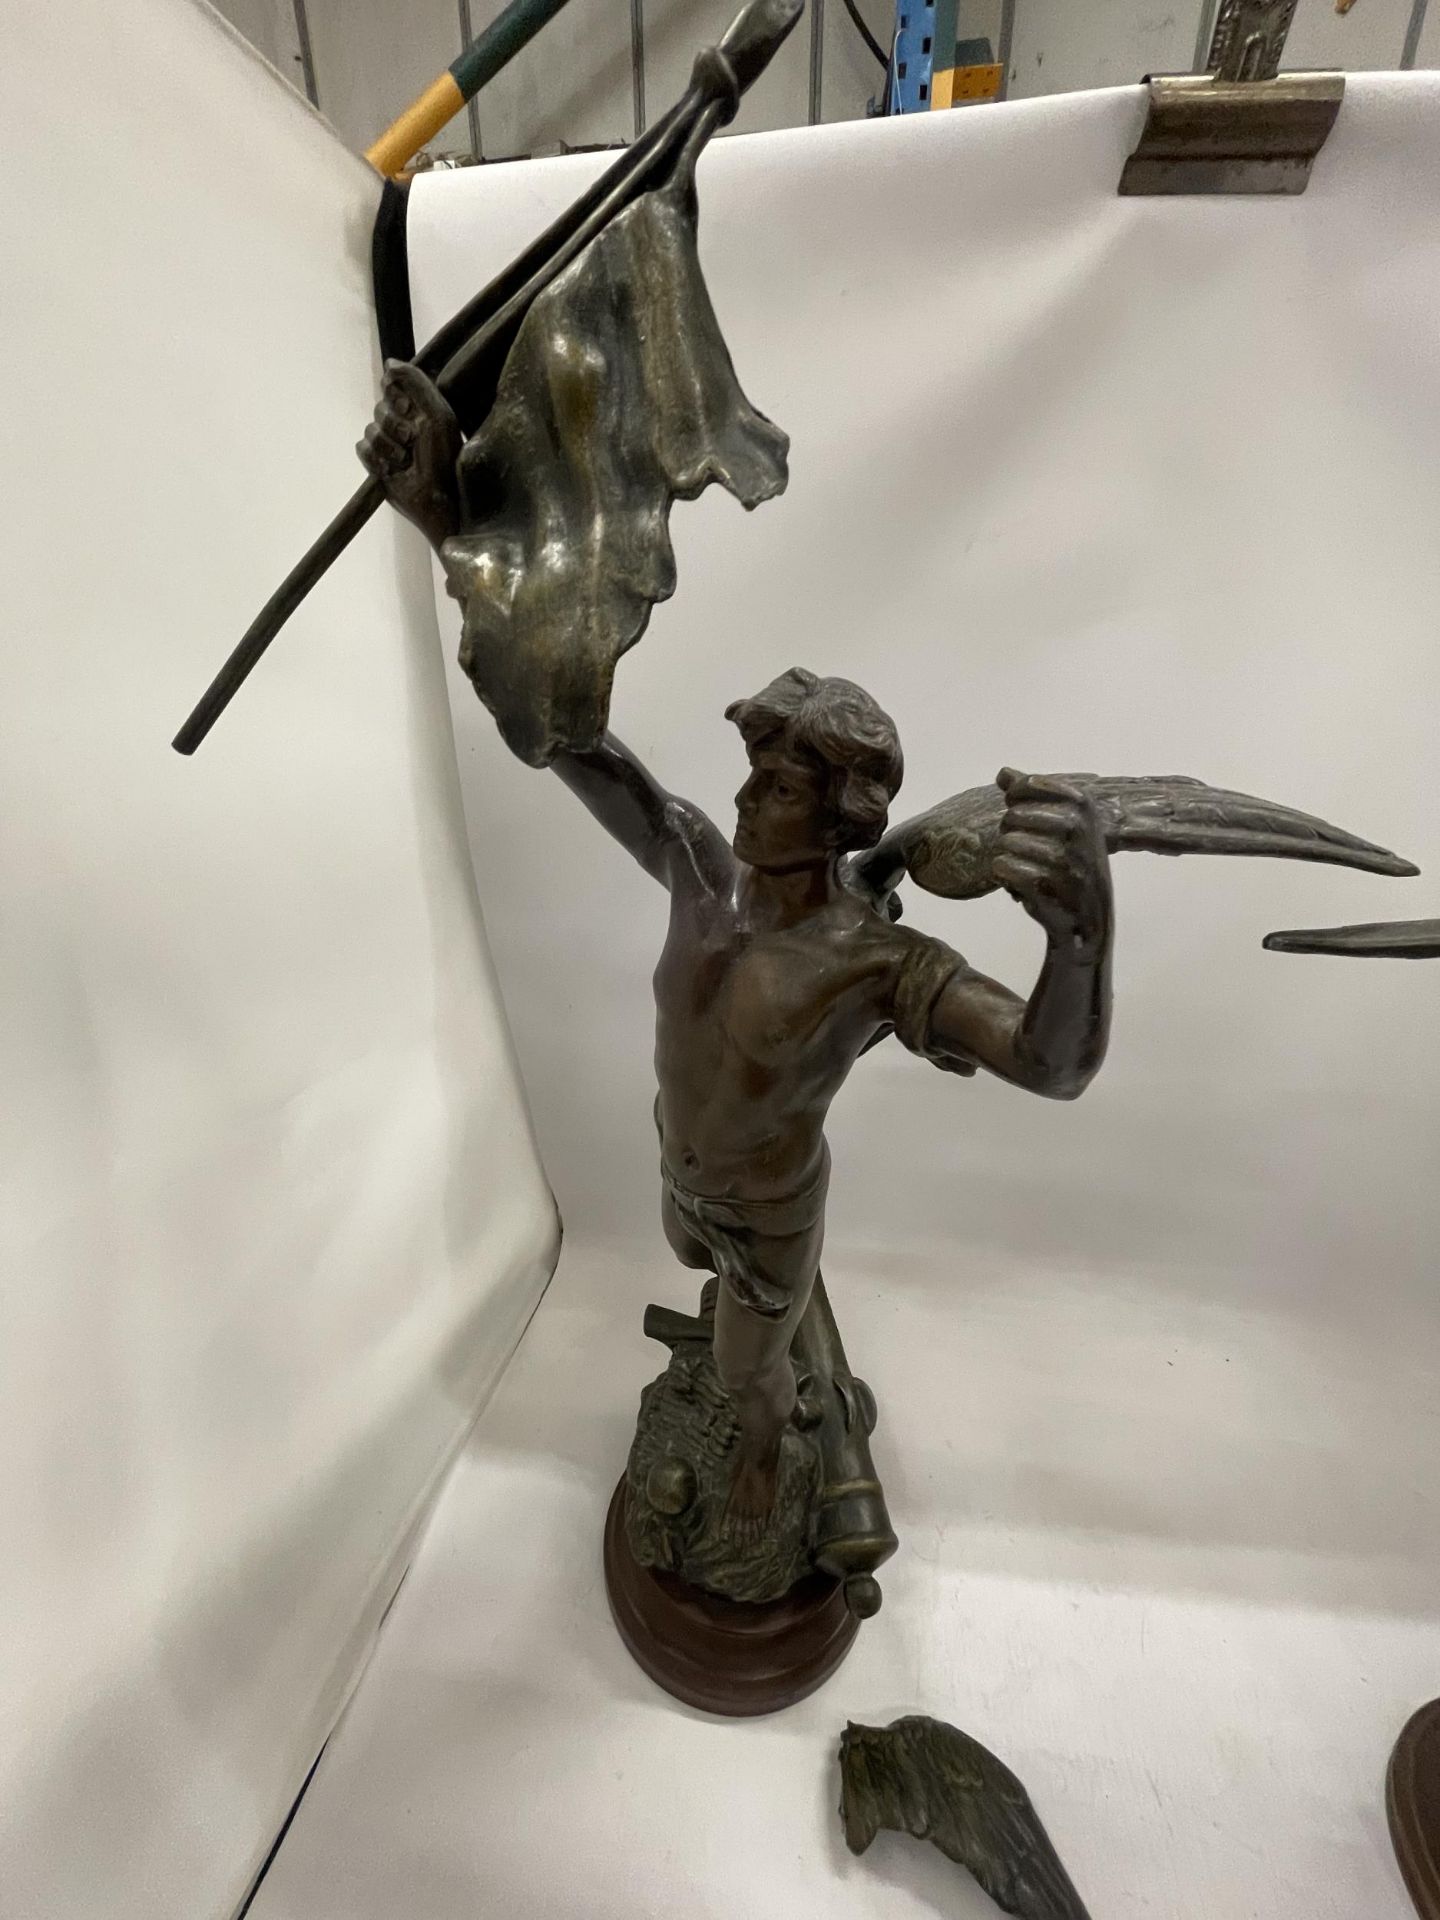 A PAIR OF VINGTAGE SPELTER CHERUB FIGURES, SIGNED (ONE WING A/F) - Image 3 of 6